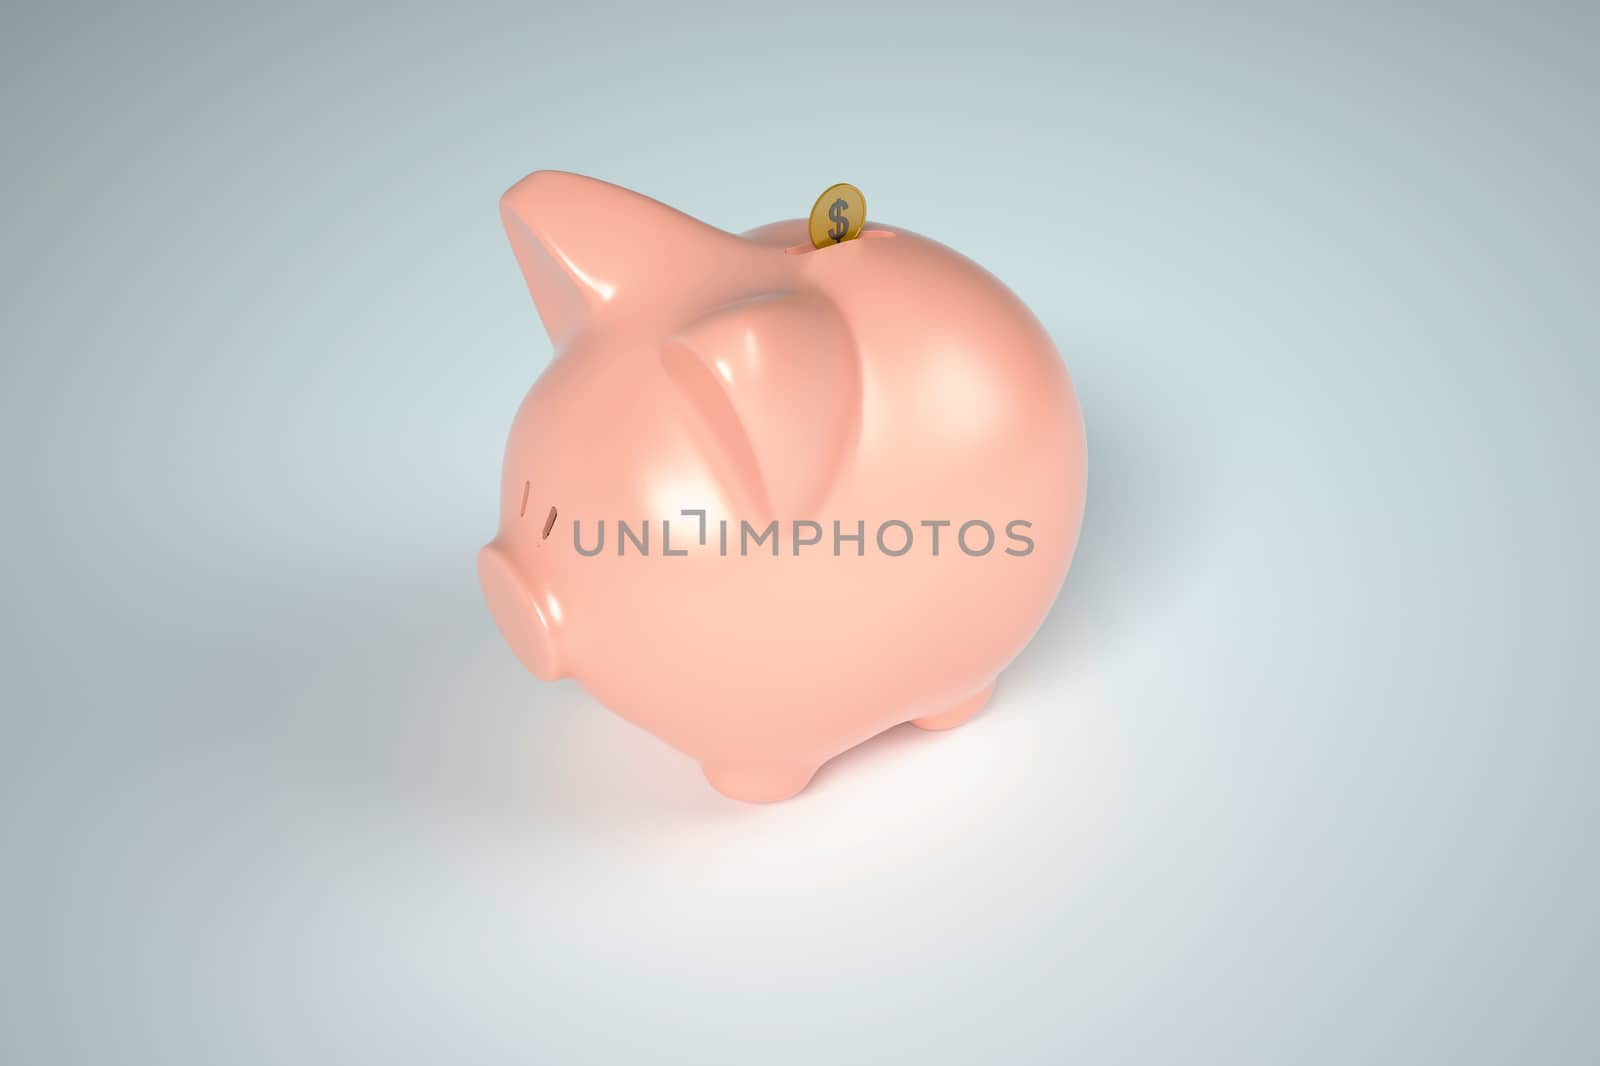 Isolated Piggy Bank on white background.